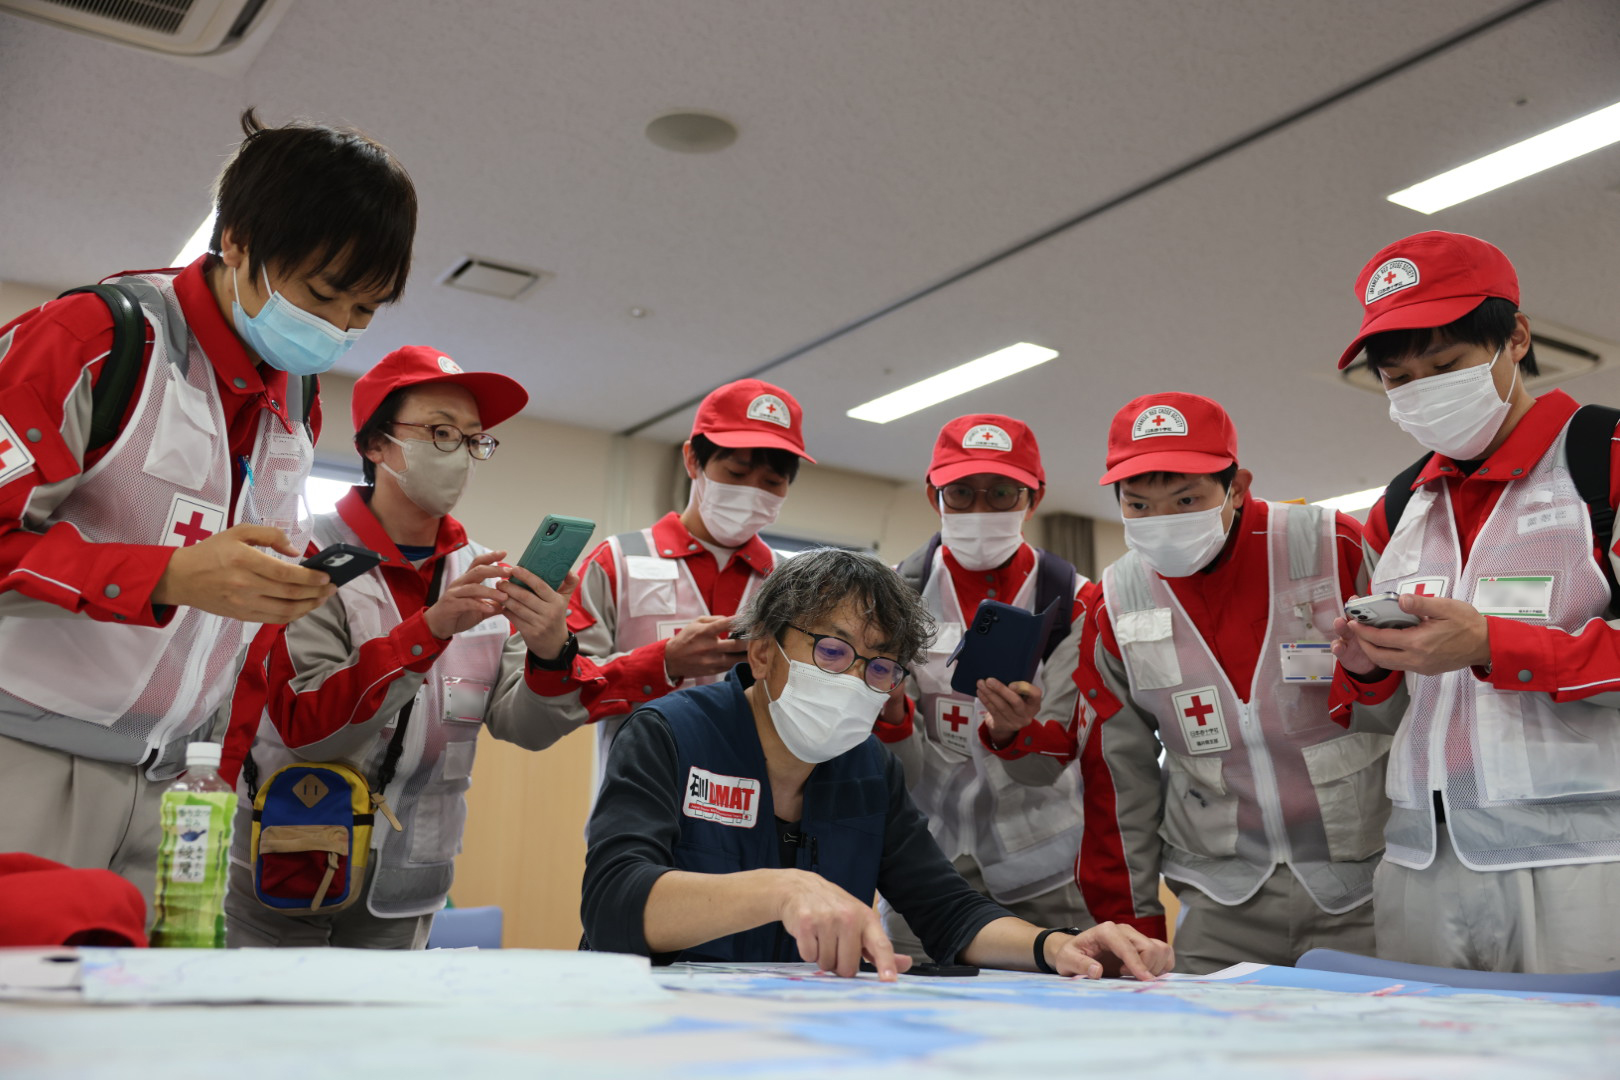 Emergency Response in Action: A Japanese Red Cross medical team arrives at Noto General Hospital to provide aid and support in the aftermath of the devastating Noto Peninsula Earthquake. Photo: © Japanese Red Cross Society/Atsushi Shibuya